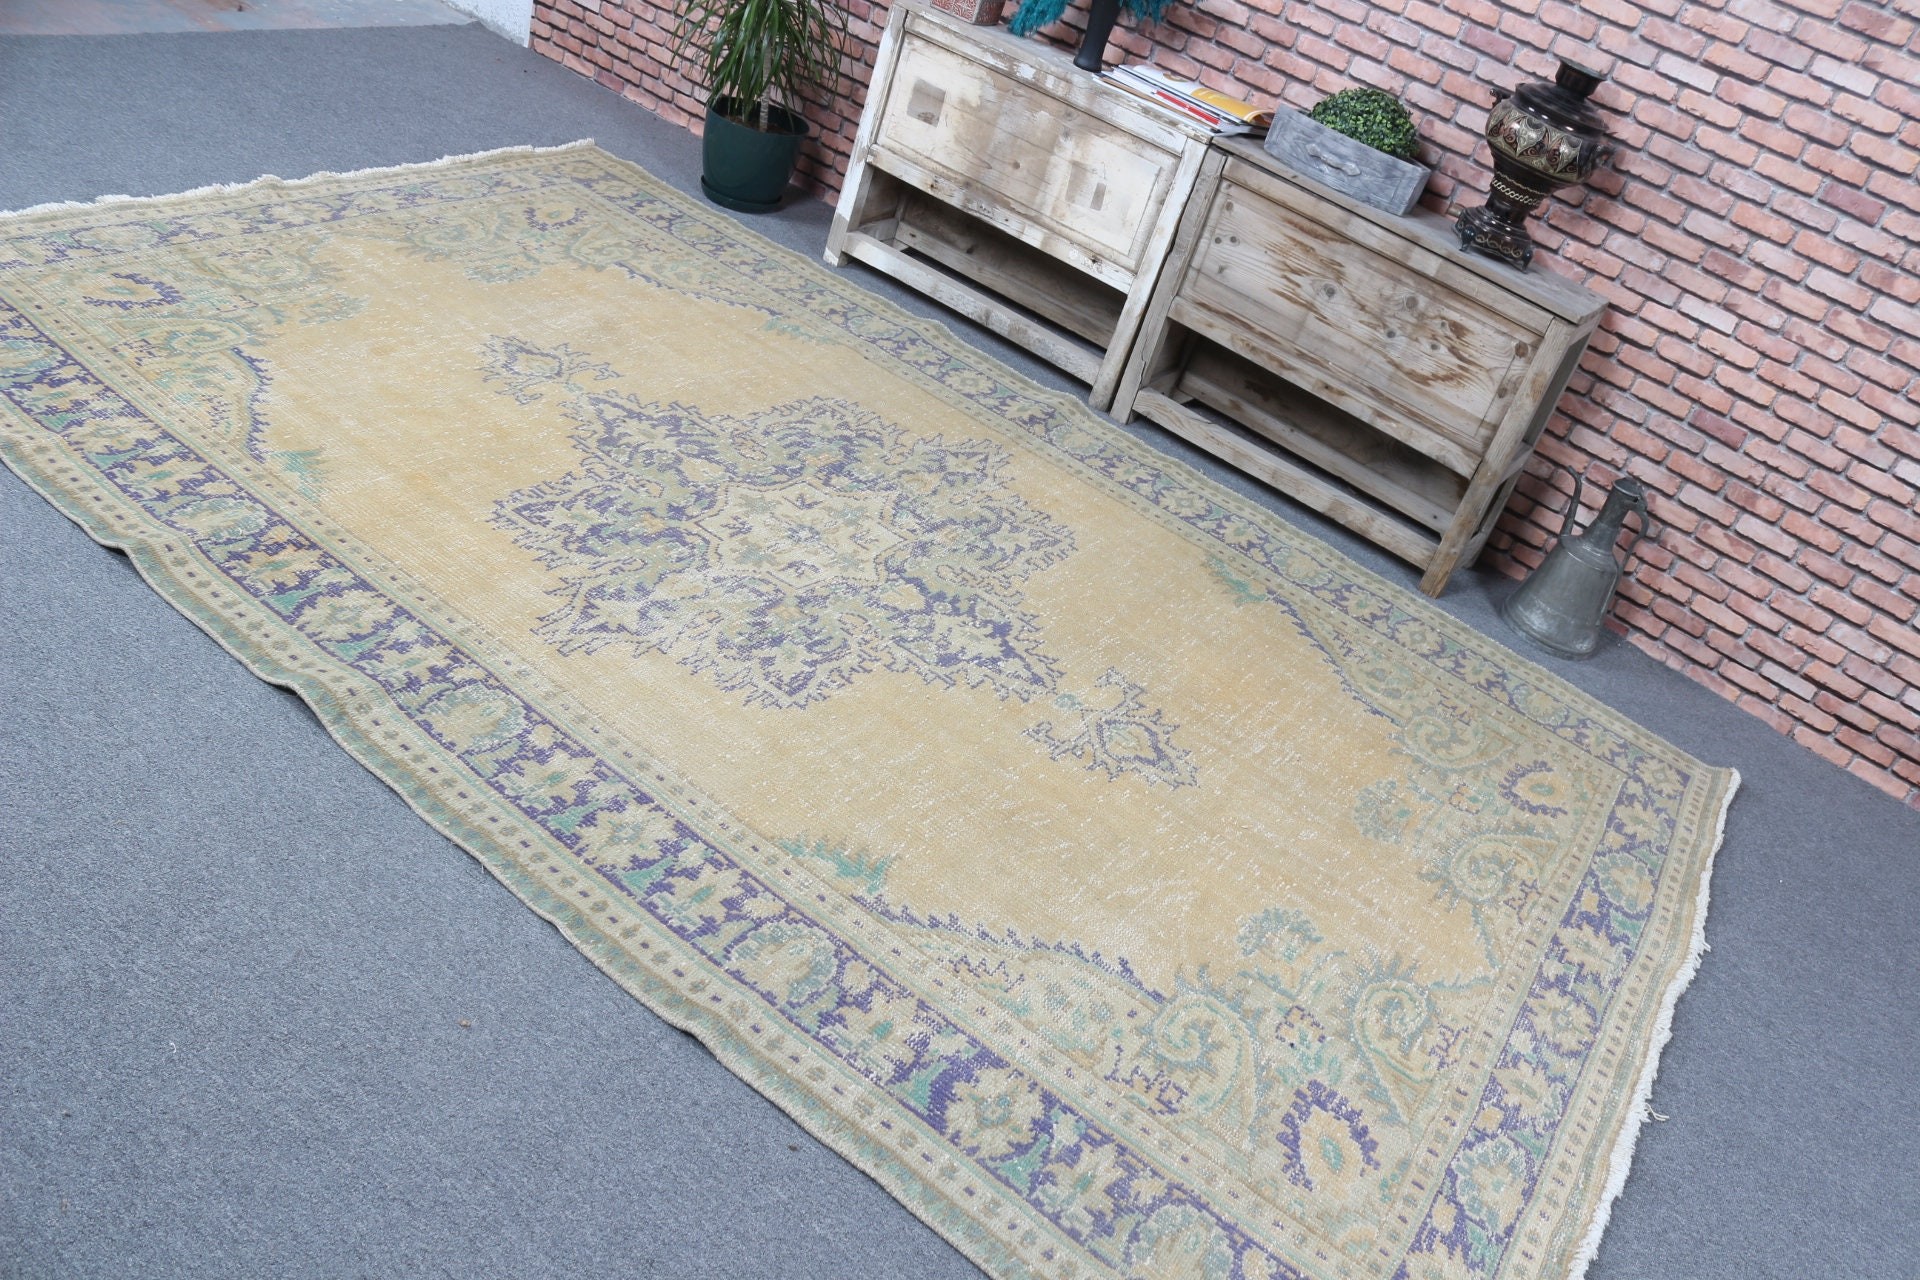 Salon Rugs, 6.1x9.7 ft Large Rugs, Antique Rugs, Turkish Rug, Bedroom Rug, Yellow Kitchen Rug, Rugs for Salon, Moroccan Rug, Vintage Rug